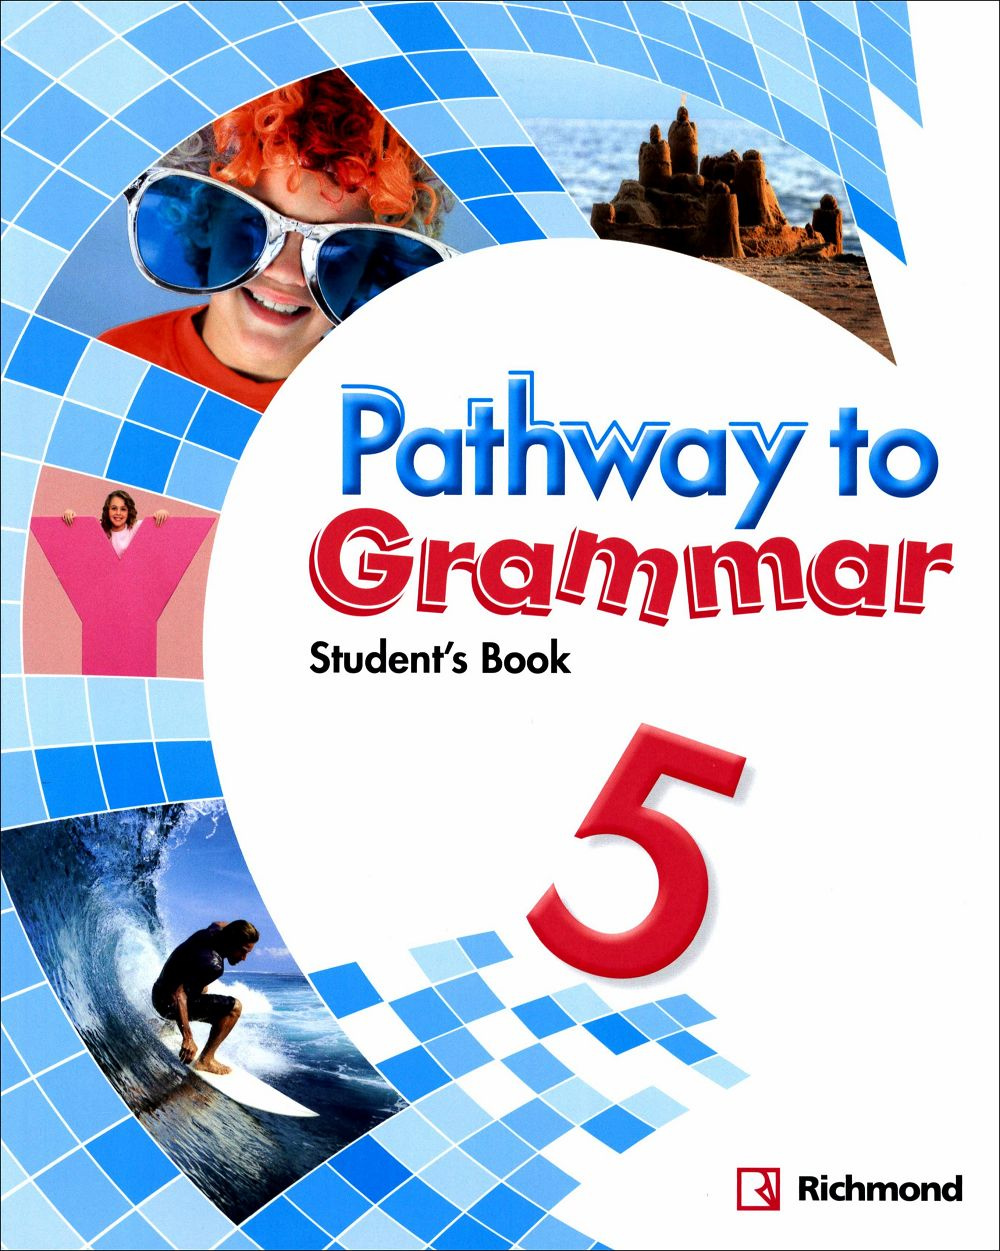 Pathway to Grammar (5) Student’s Book with Audio CD/1片